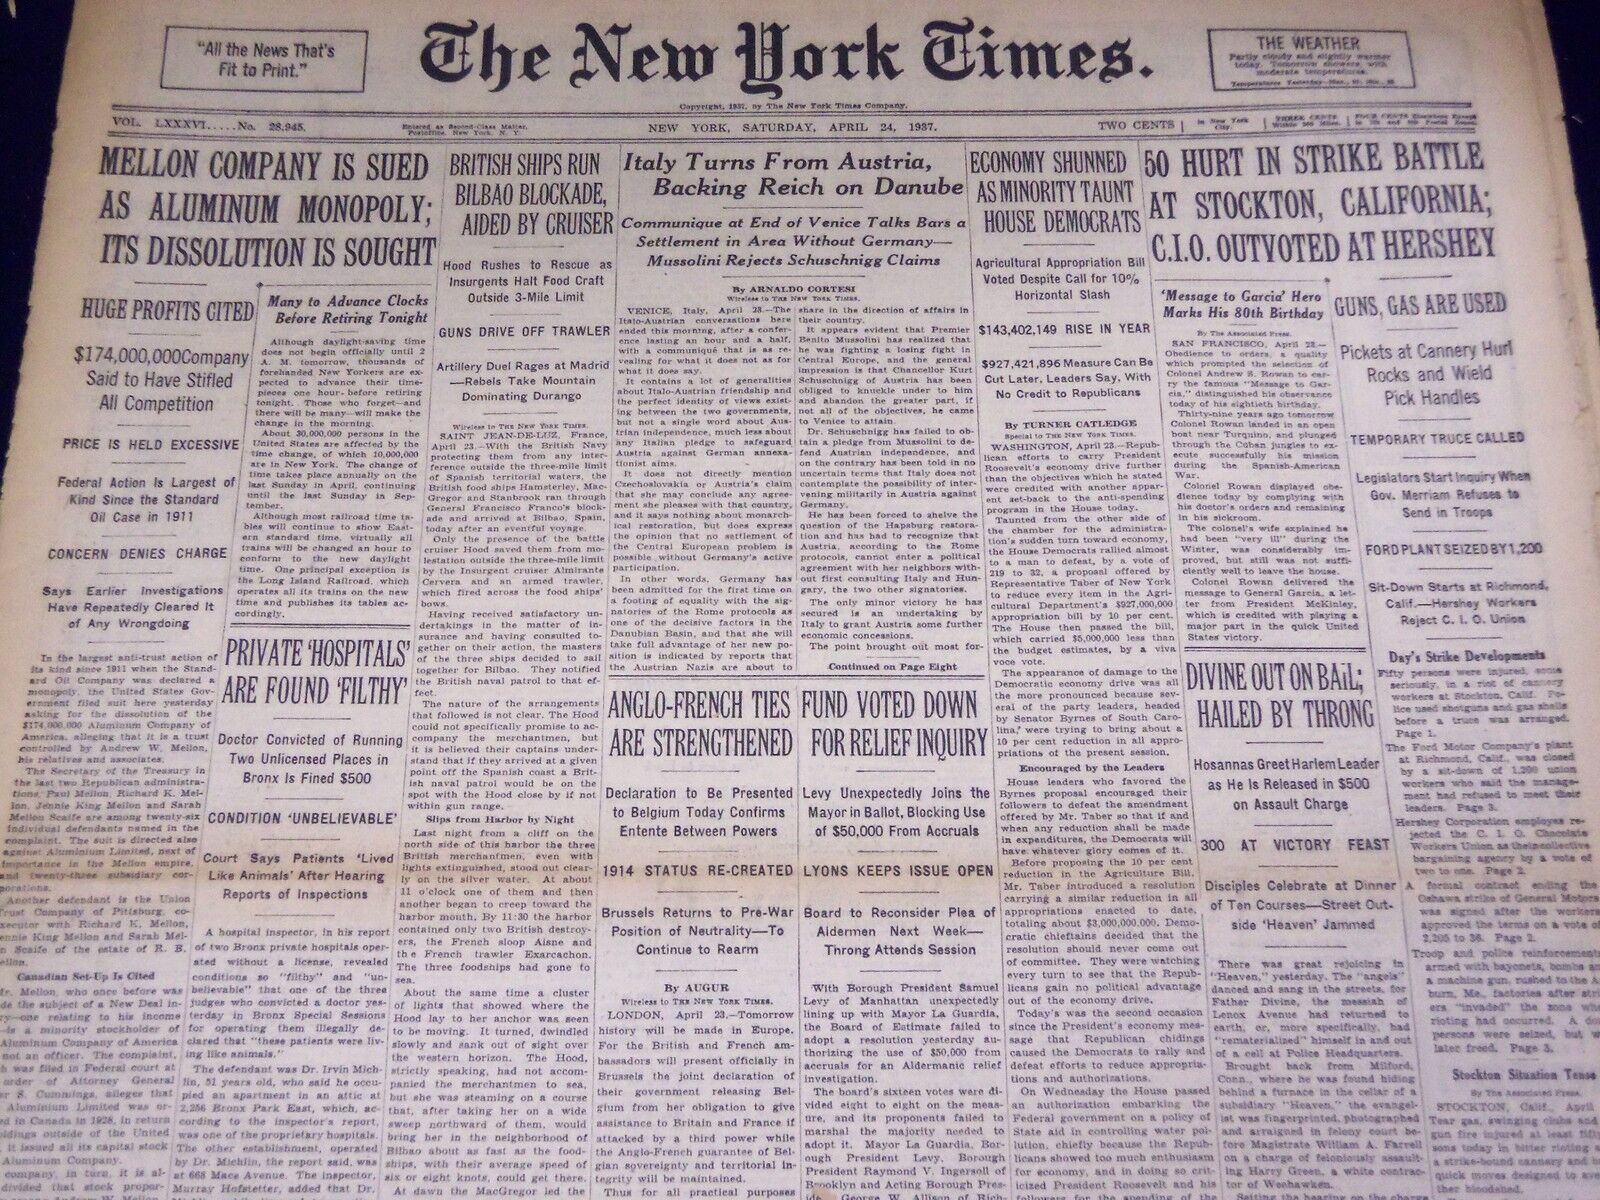 1937 APRIL 24 NEW YORK TIMES - ITALY BACKS REICH ON DANUBE - NT 3098